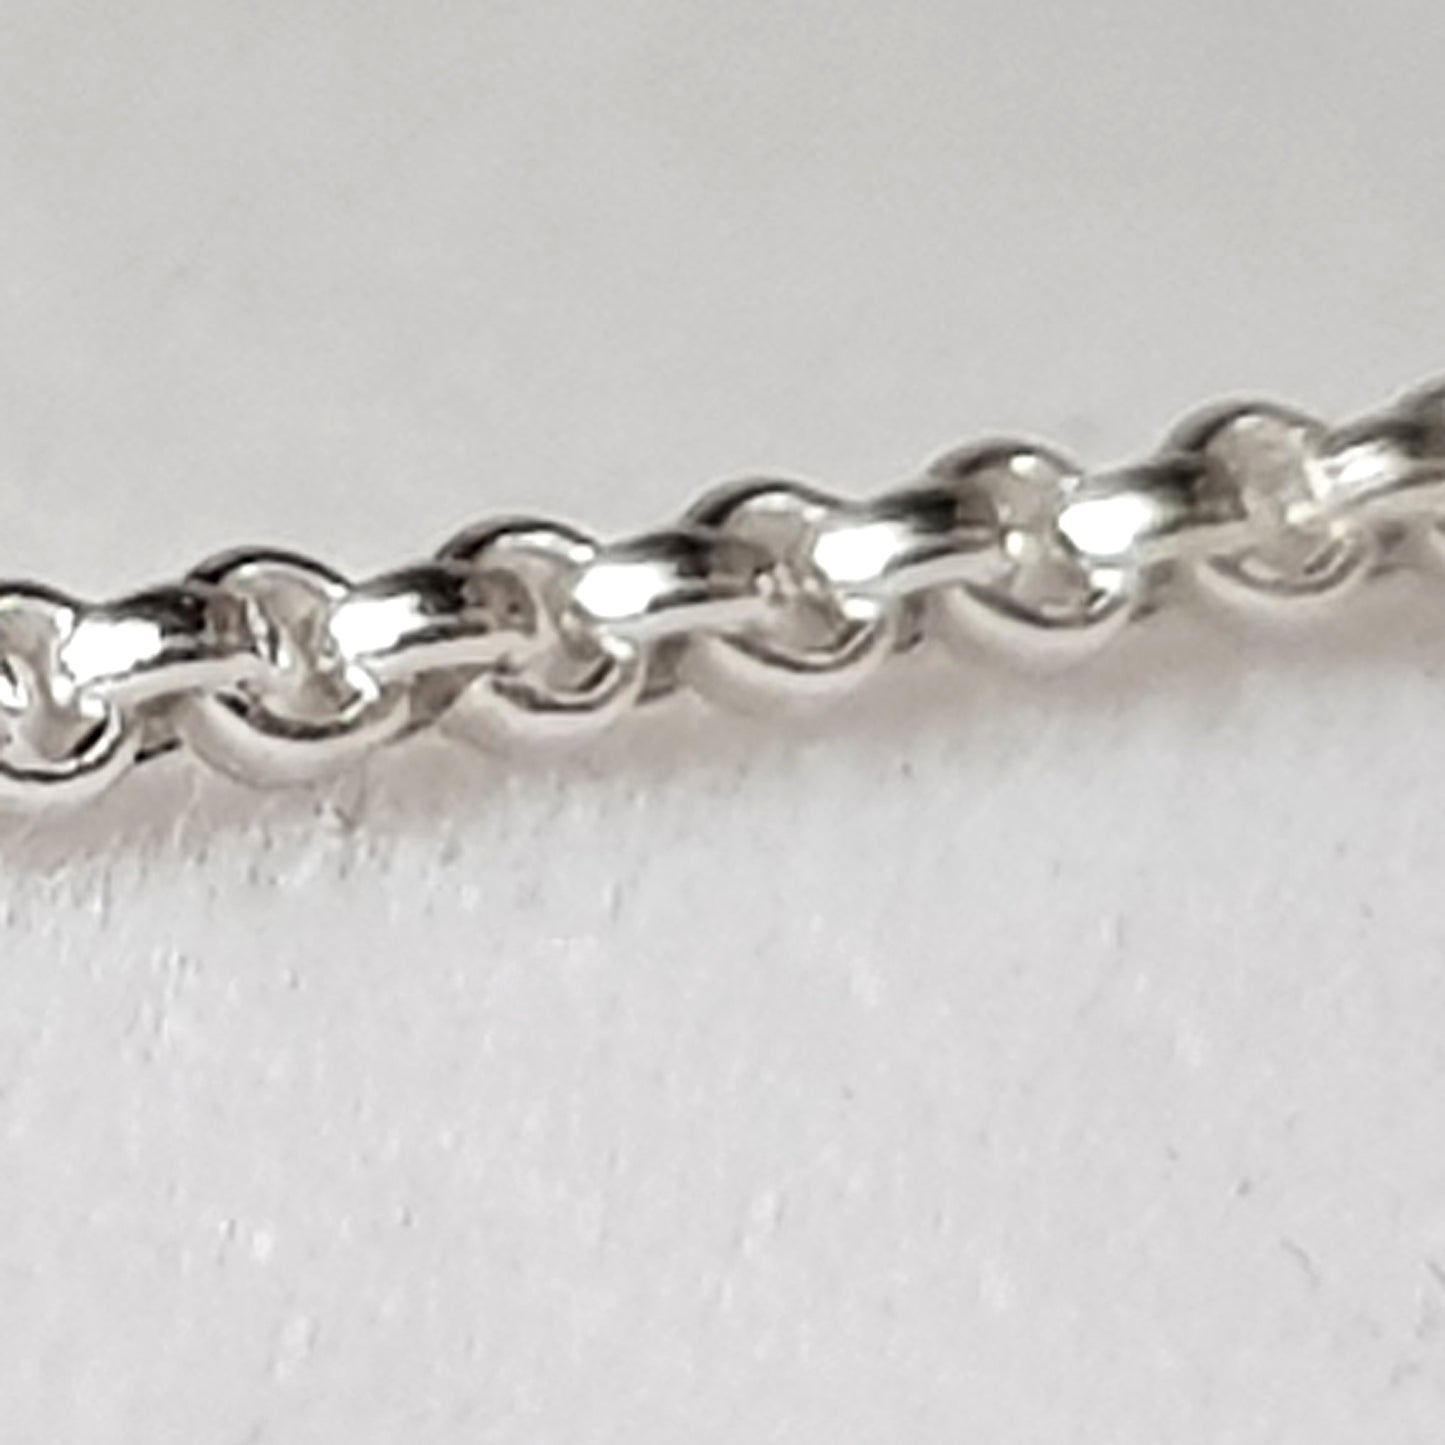 Chains - Rolo Chain Genuine Sterling Silver Unfinished | Jewellery Making Supply